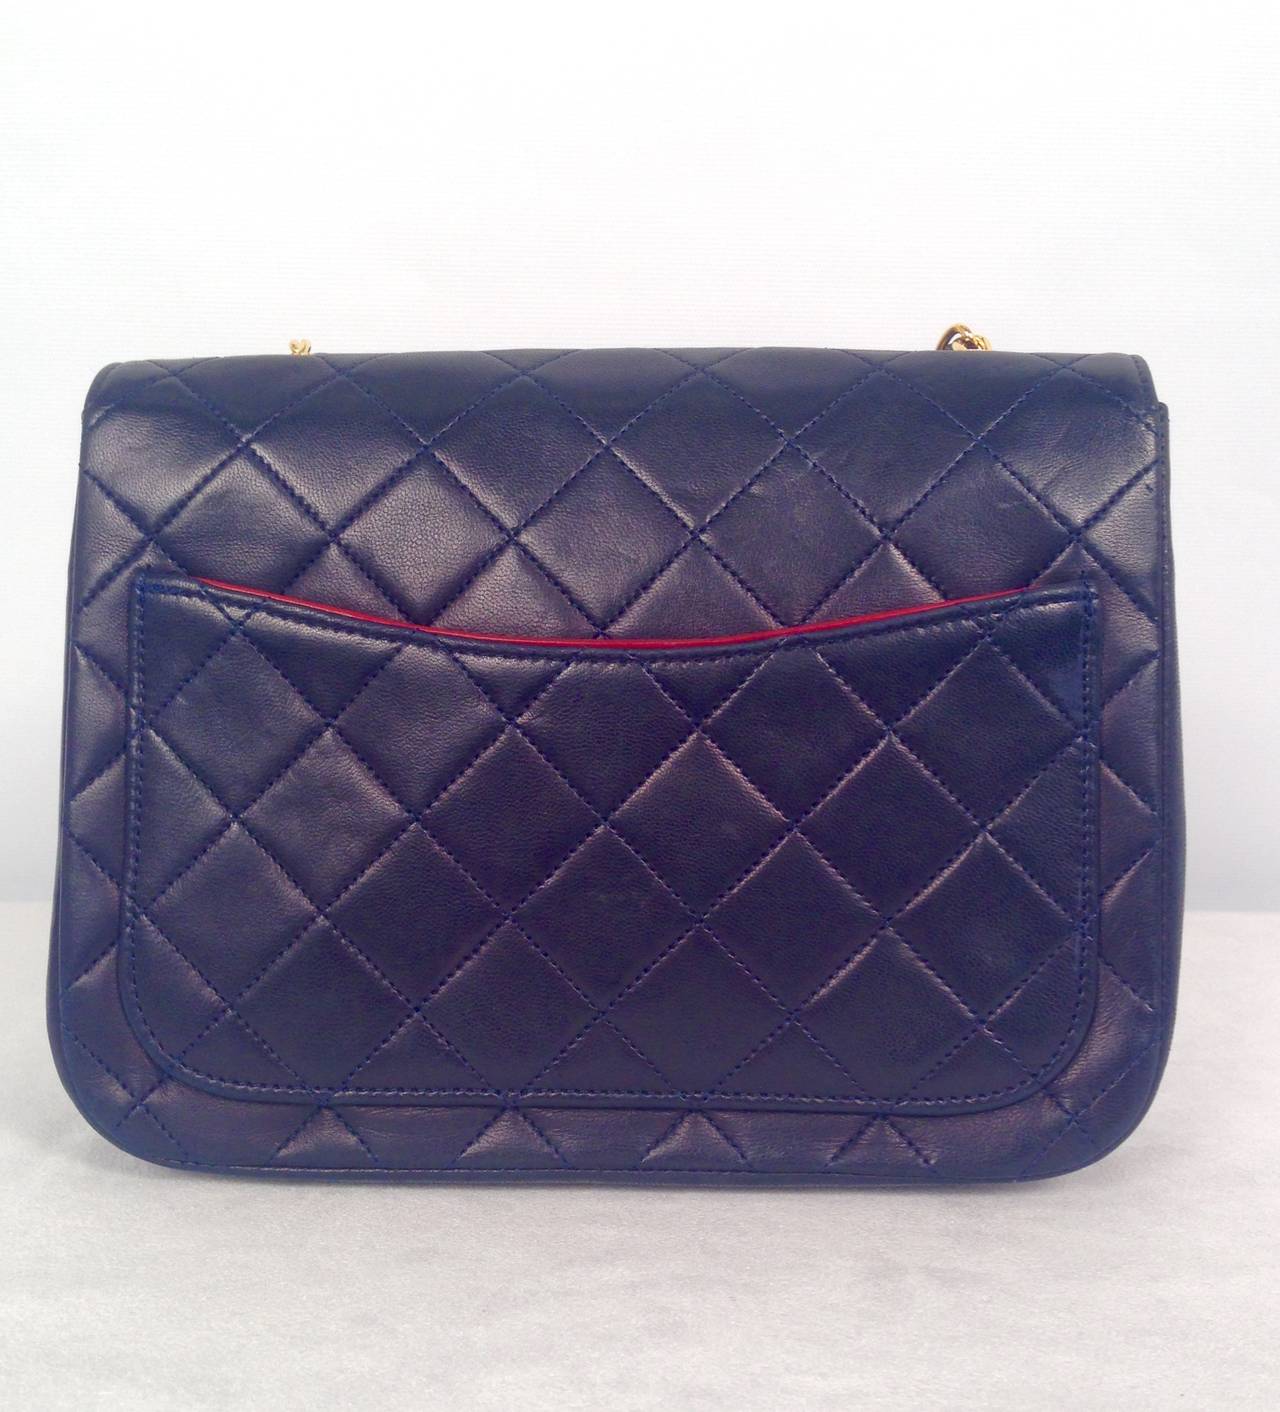 Vintage Chanel Navy Lambskin Bag is an excellent example of Chanel Chic!  Fit for a lady, supple navy lambskin is quilted in diamond AND vertical patterns.   Features include gold tone hardware, external back pocket, signature double 